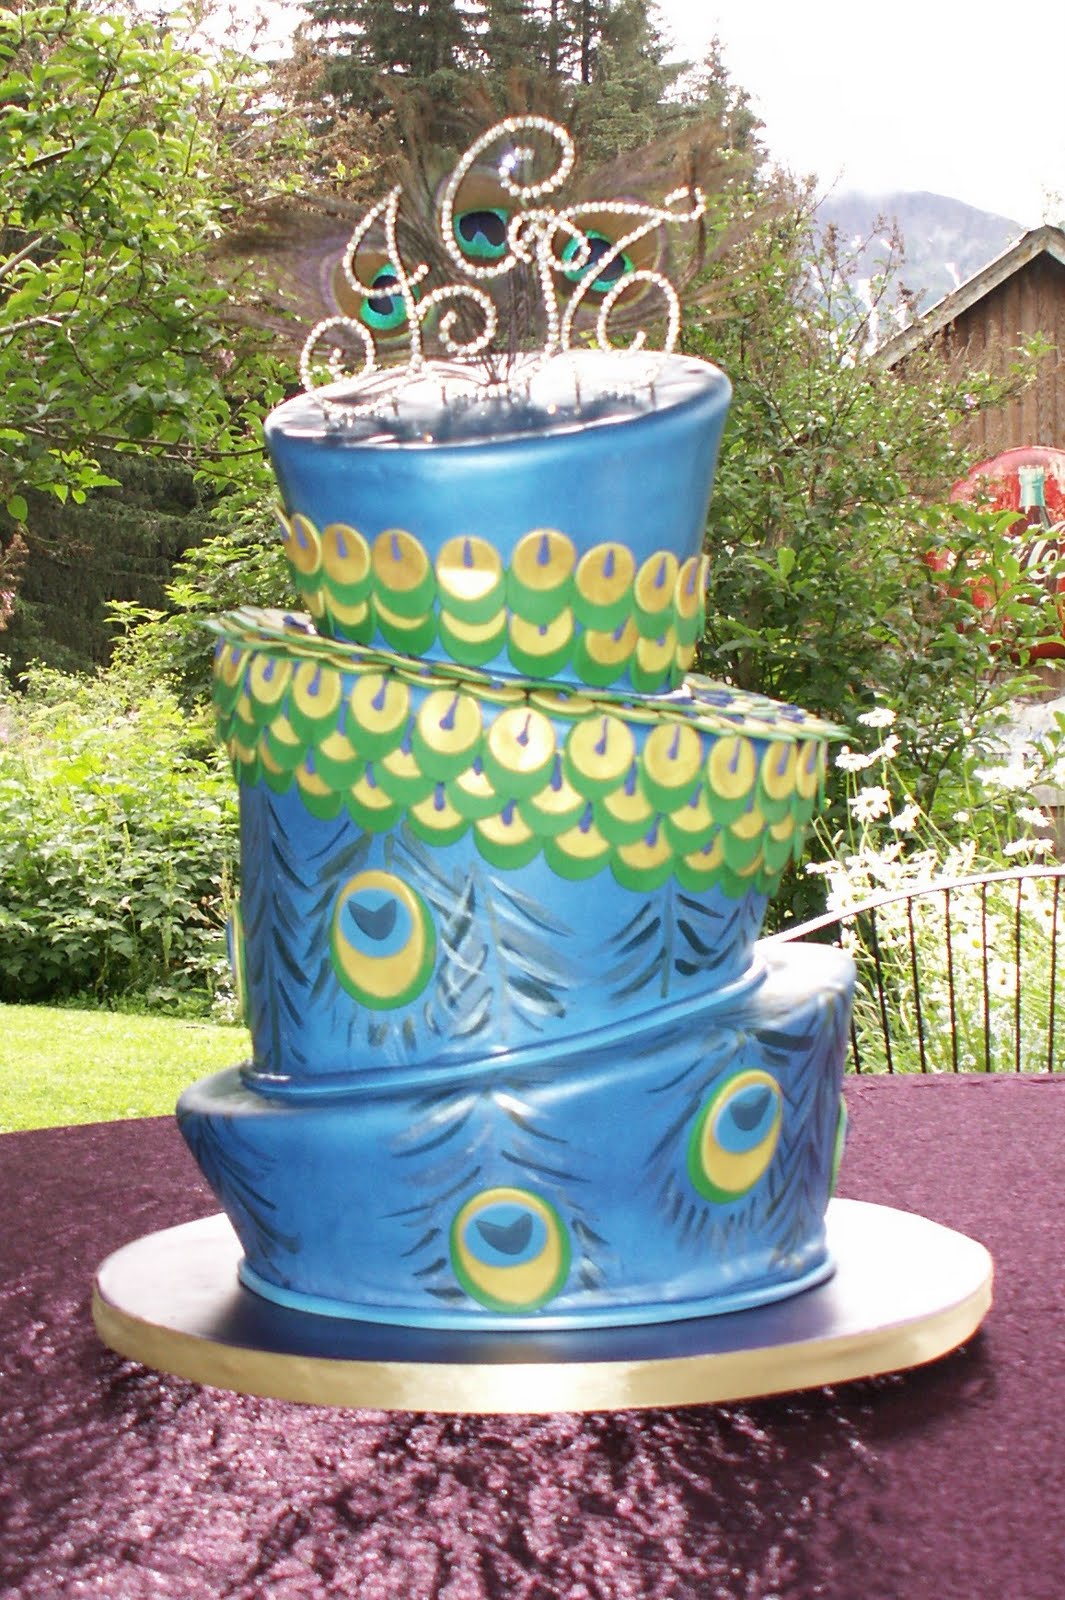 Wedding Cakes Pictures: Peacock Wedding Cakes